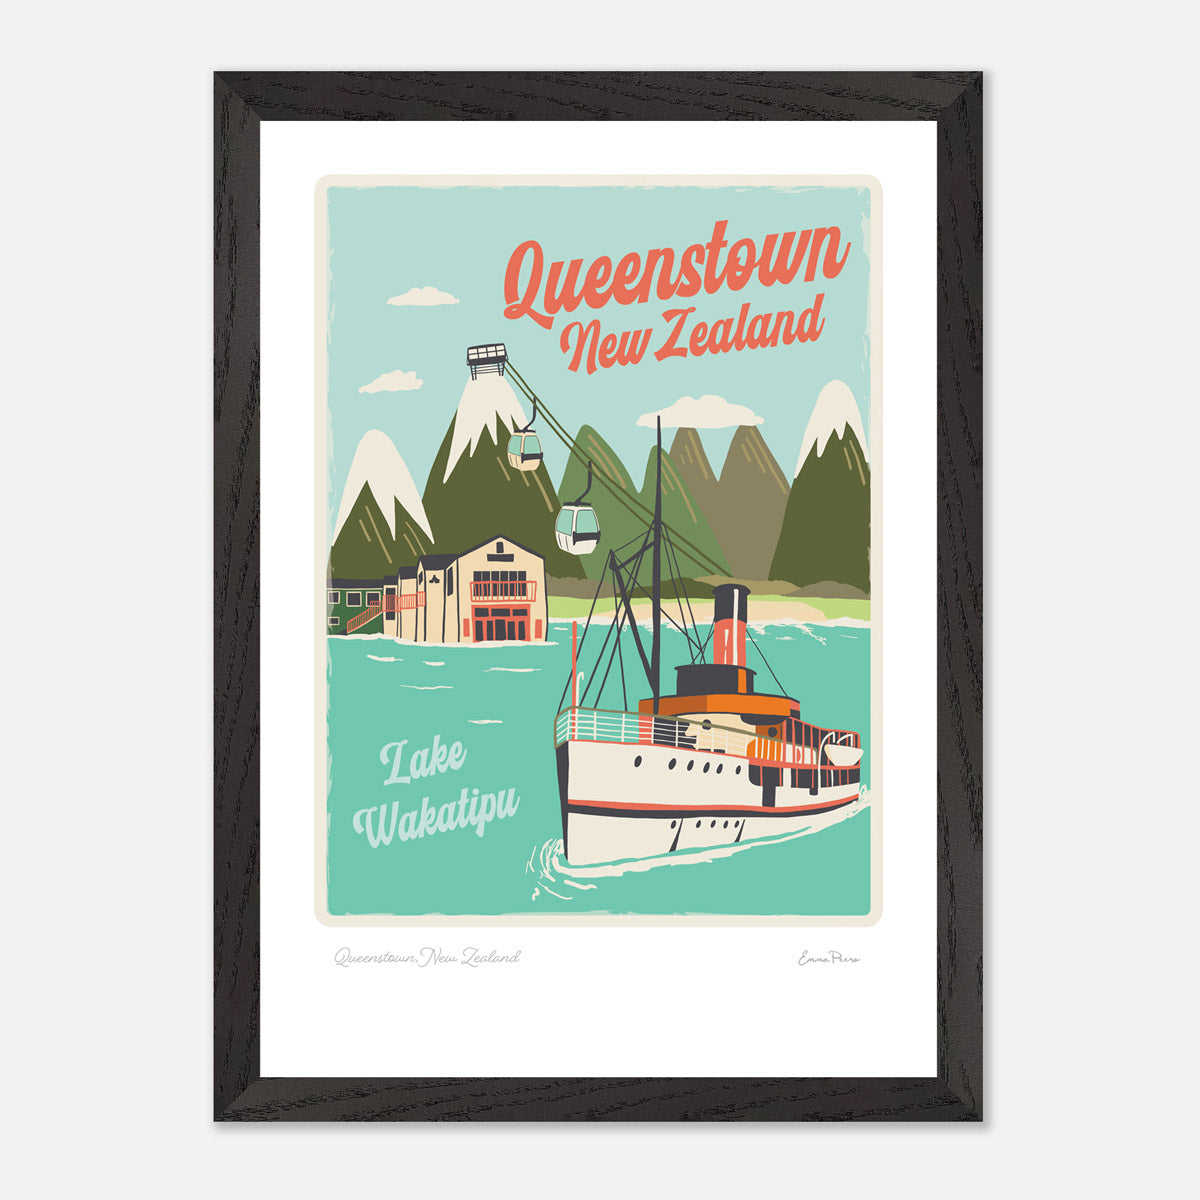 Framed Travel Poster of Queenstown New Zealand. Illustration Art Print of Queenstown, New Zealand by Studio Peers showing lake wakatipu, skyline gondola and The Earnslaw A4 size